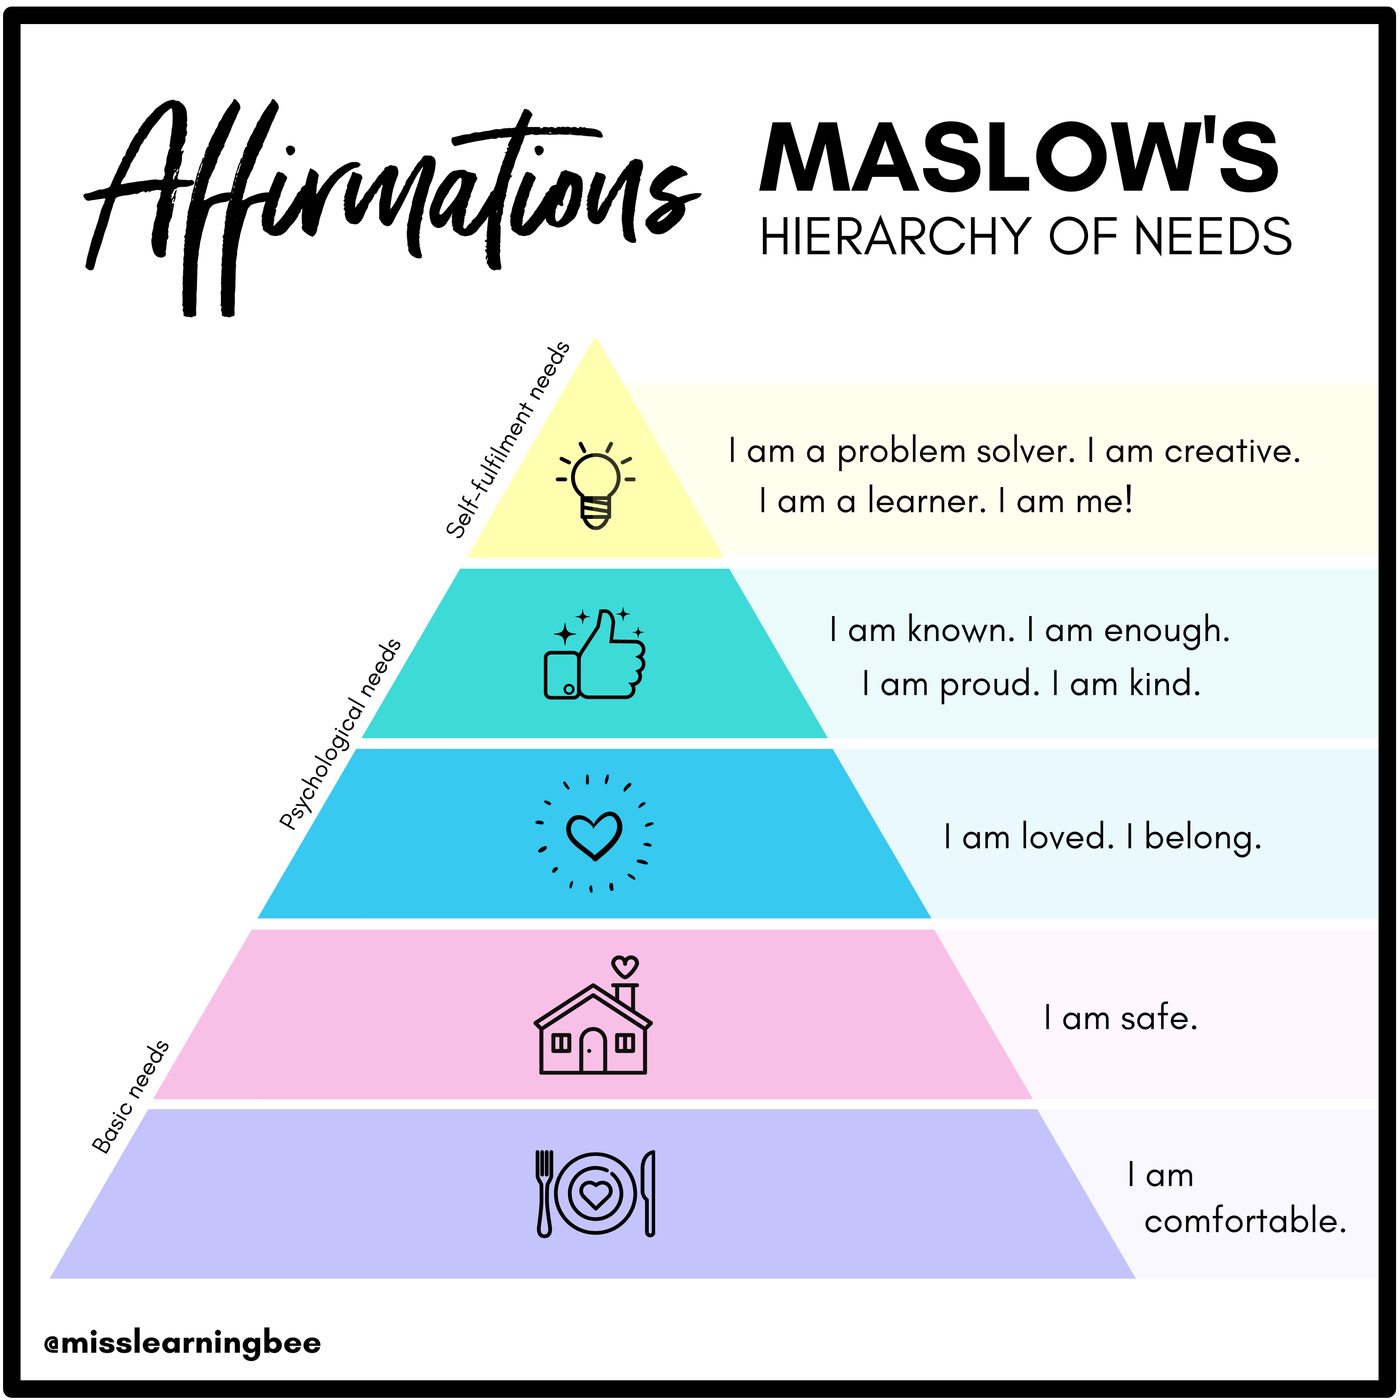 Maslow's Hierarchy Affirmation Slides